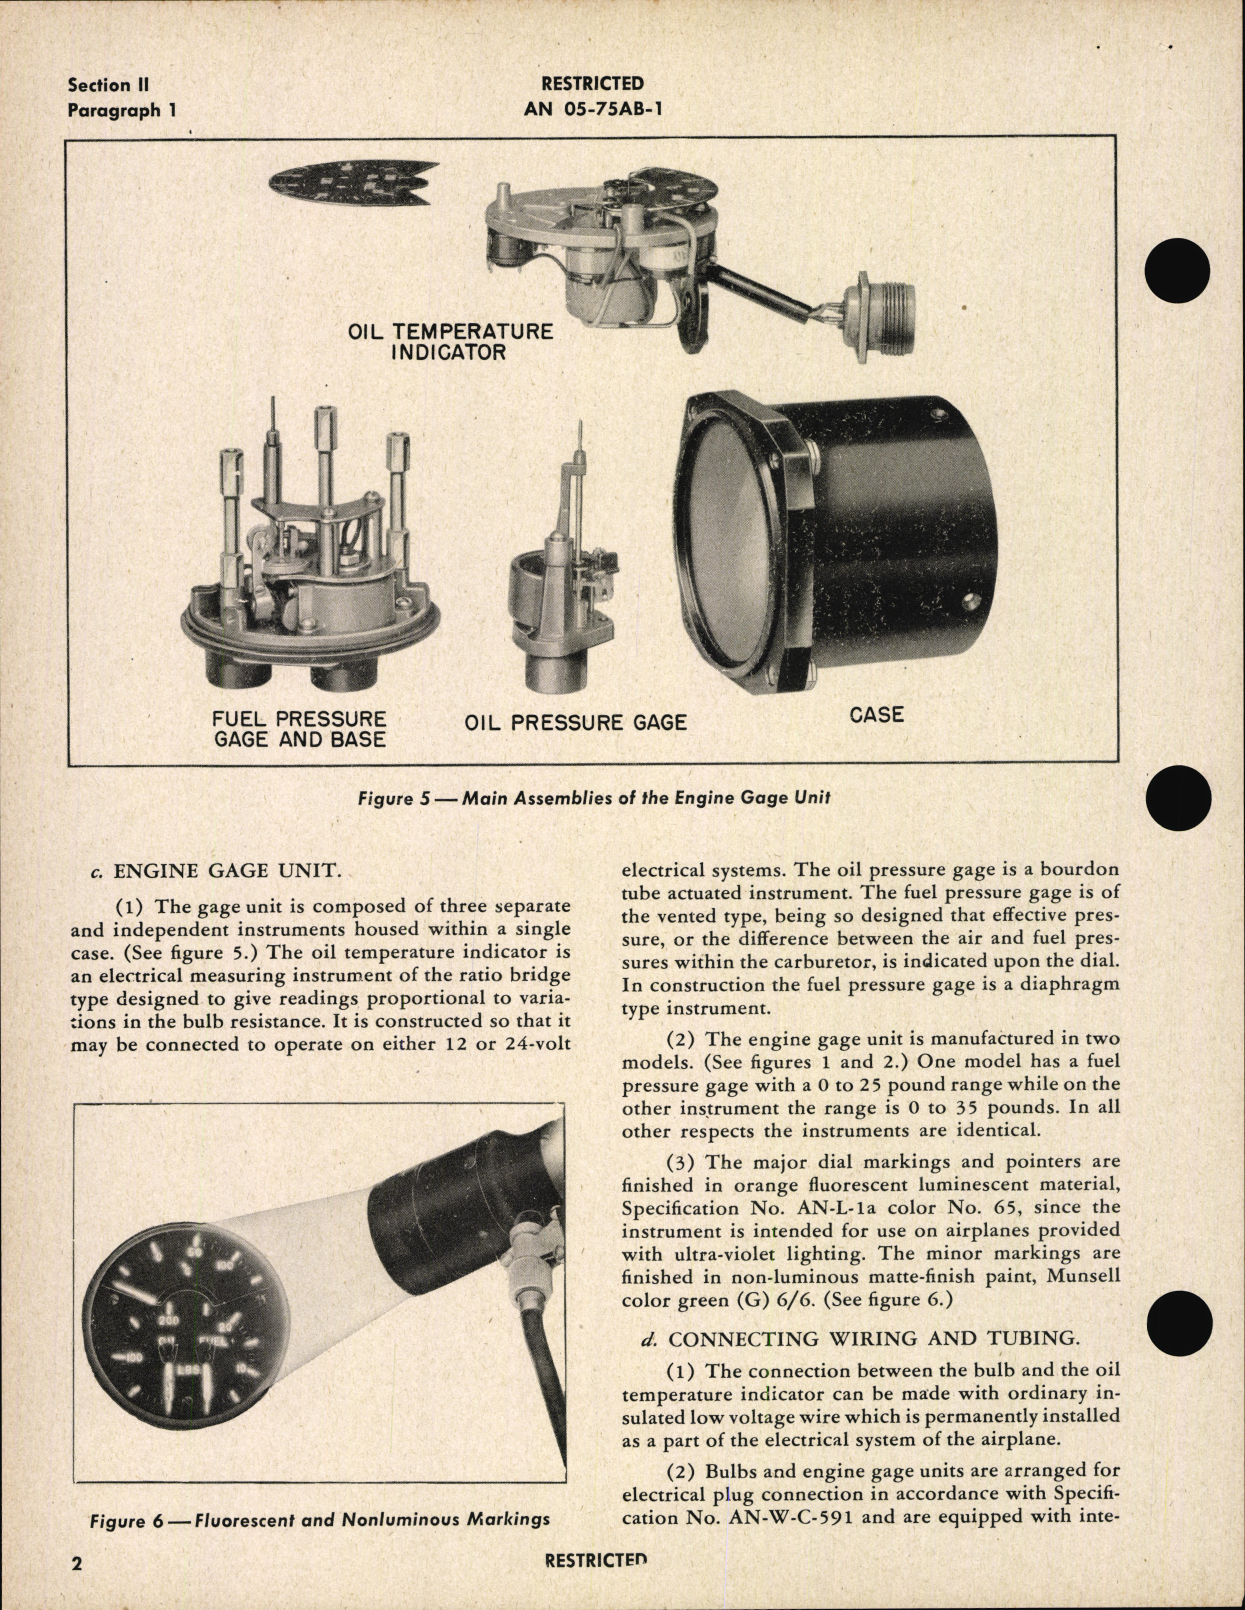 Sample page 6 from AirCorps Library document: Operation, Service, & Overhaul Instructions with Parts Catalog for Engine Gage Units